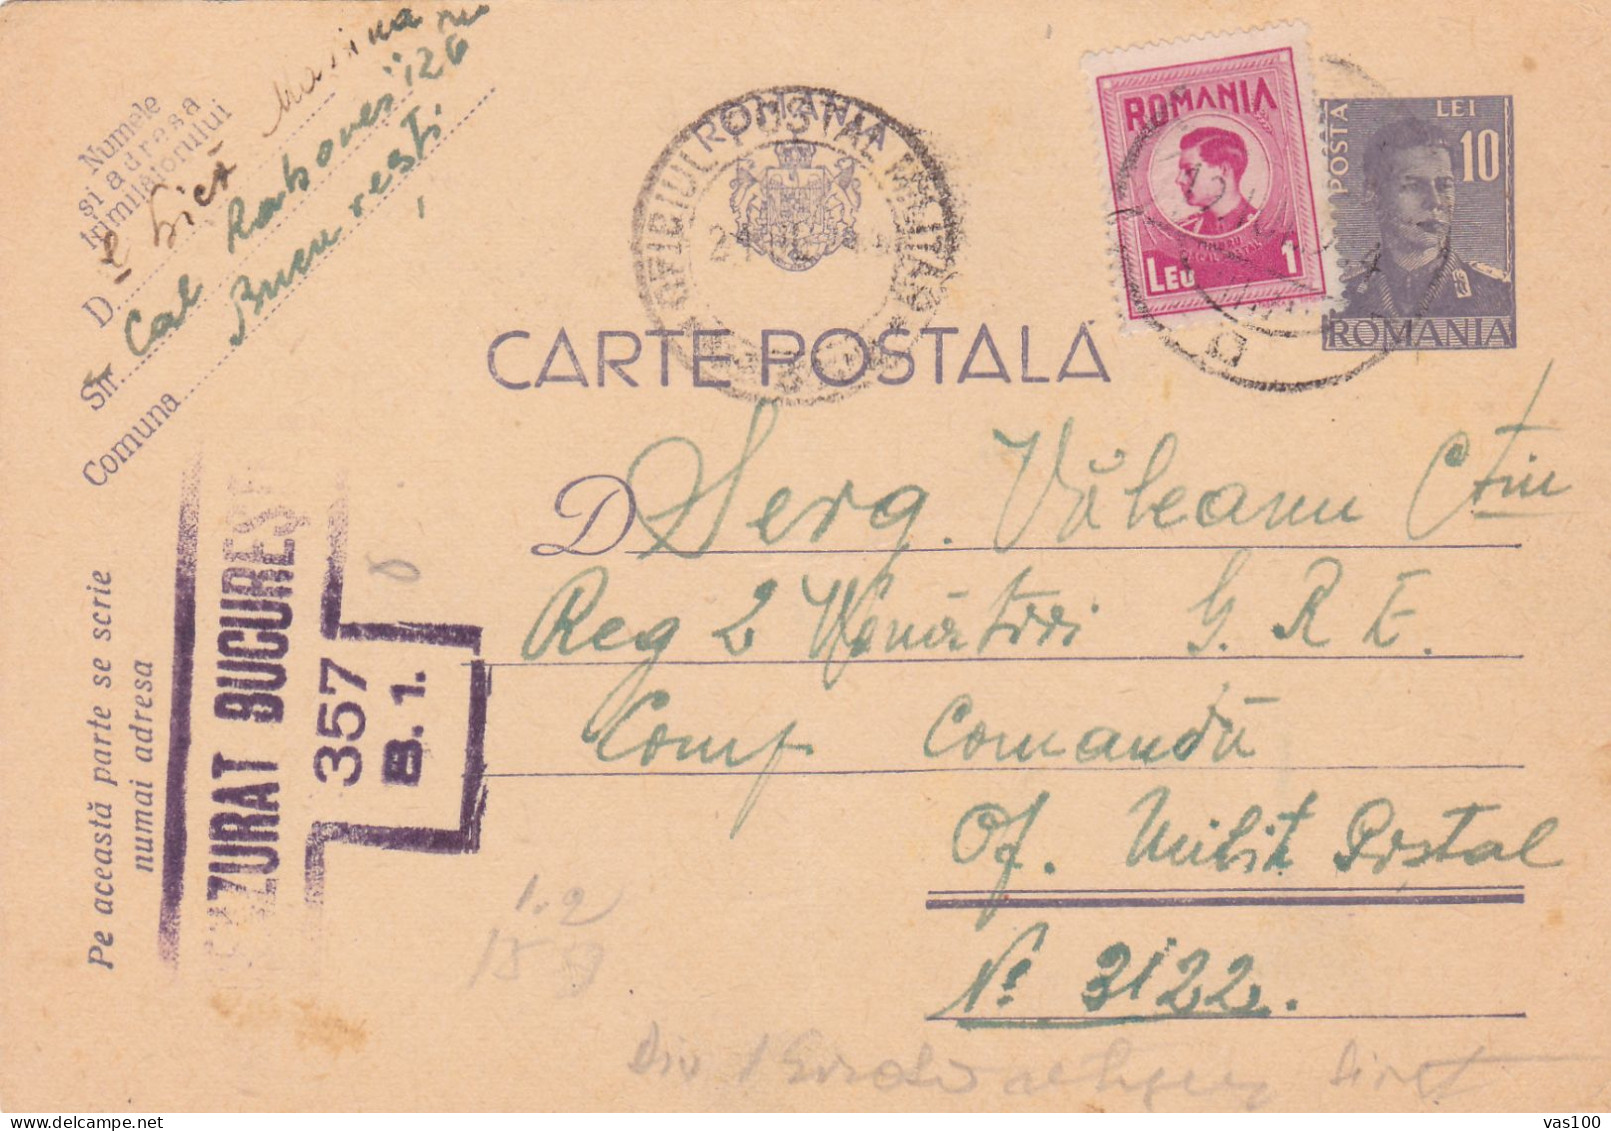 Romania, 1941, WWII  Censored, CENSOR OPM #3122, POSTCARD STATIONERY - World War 2 Letters